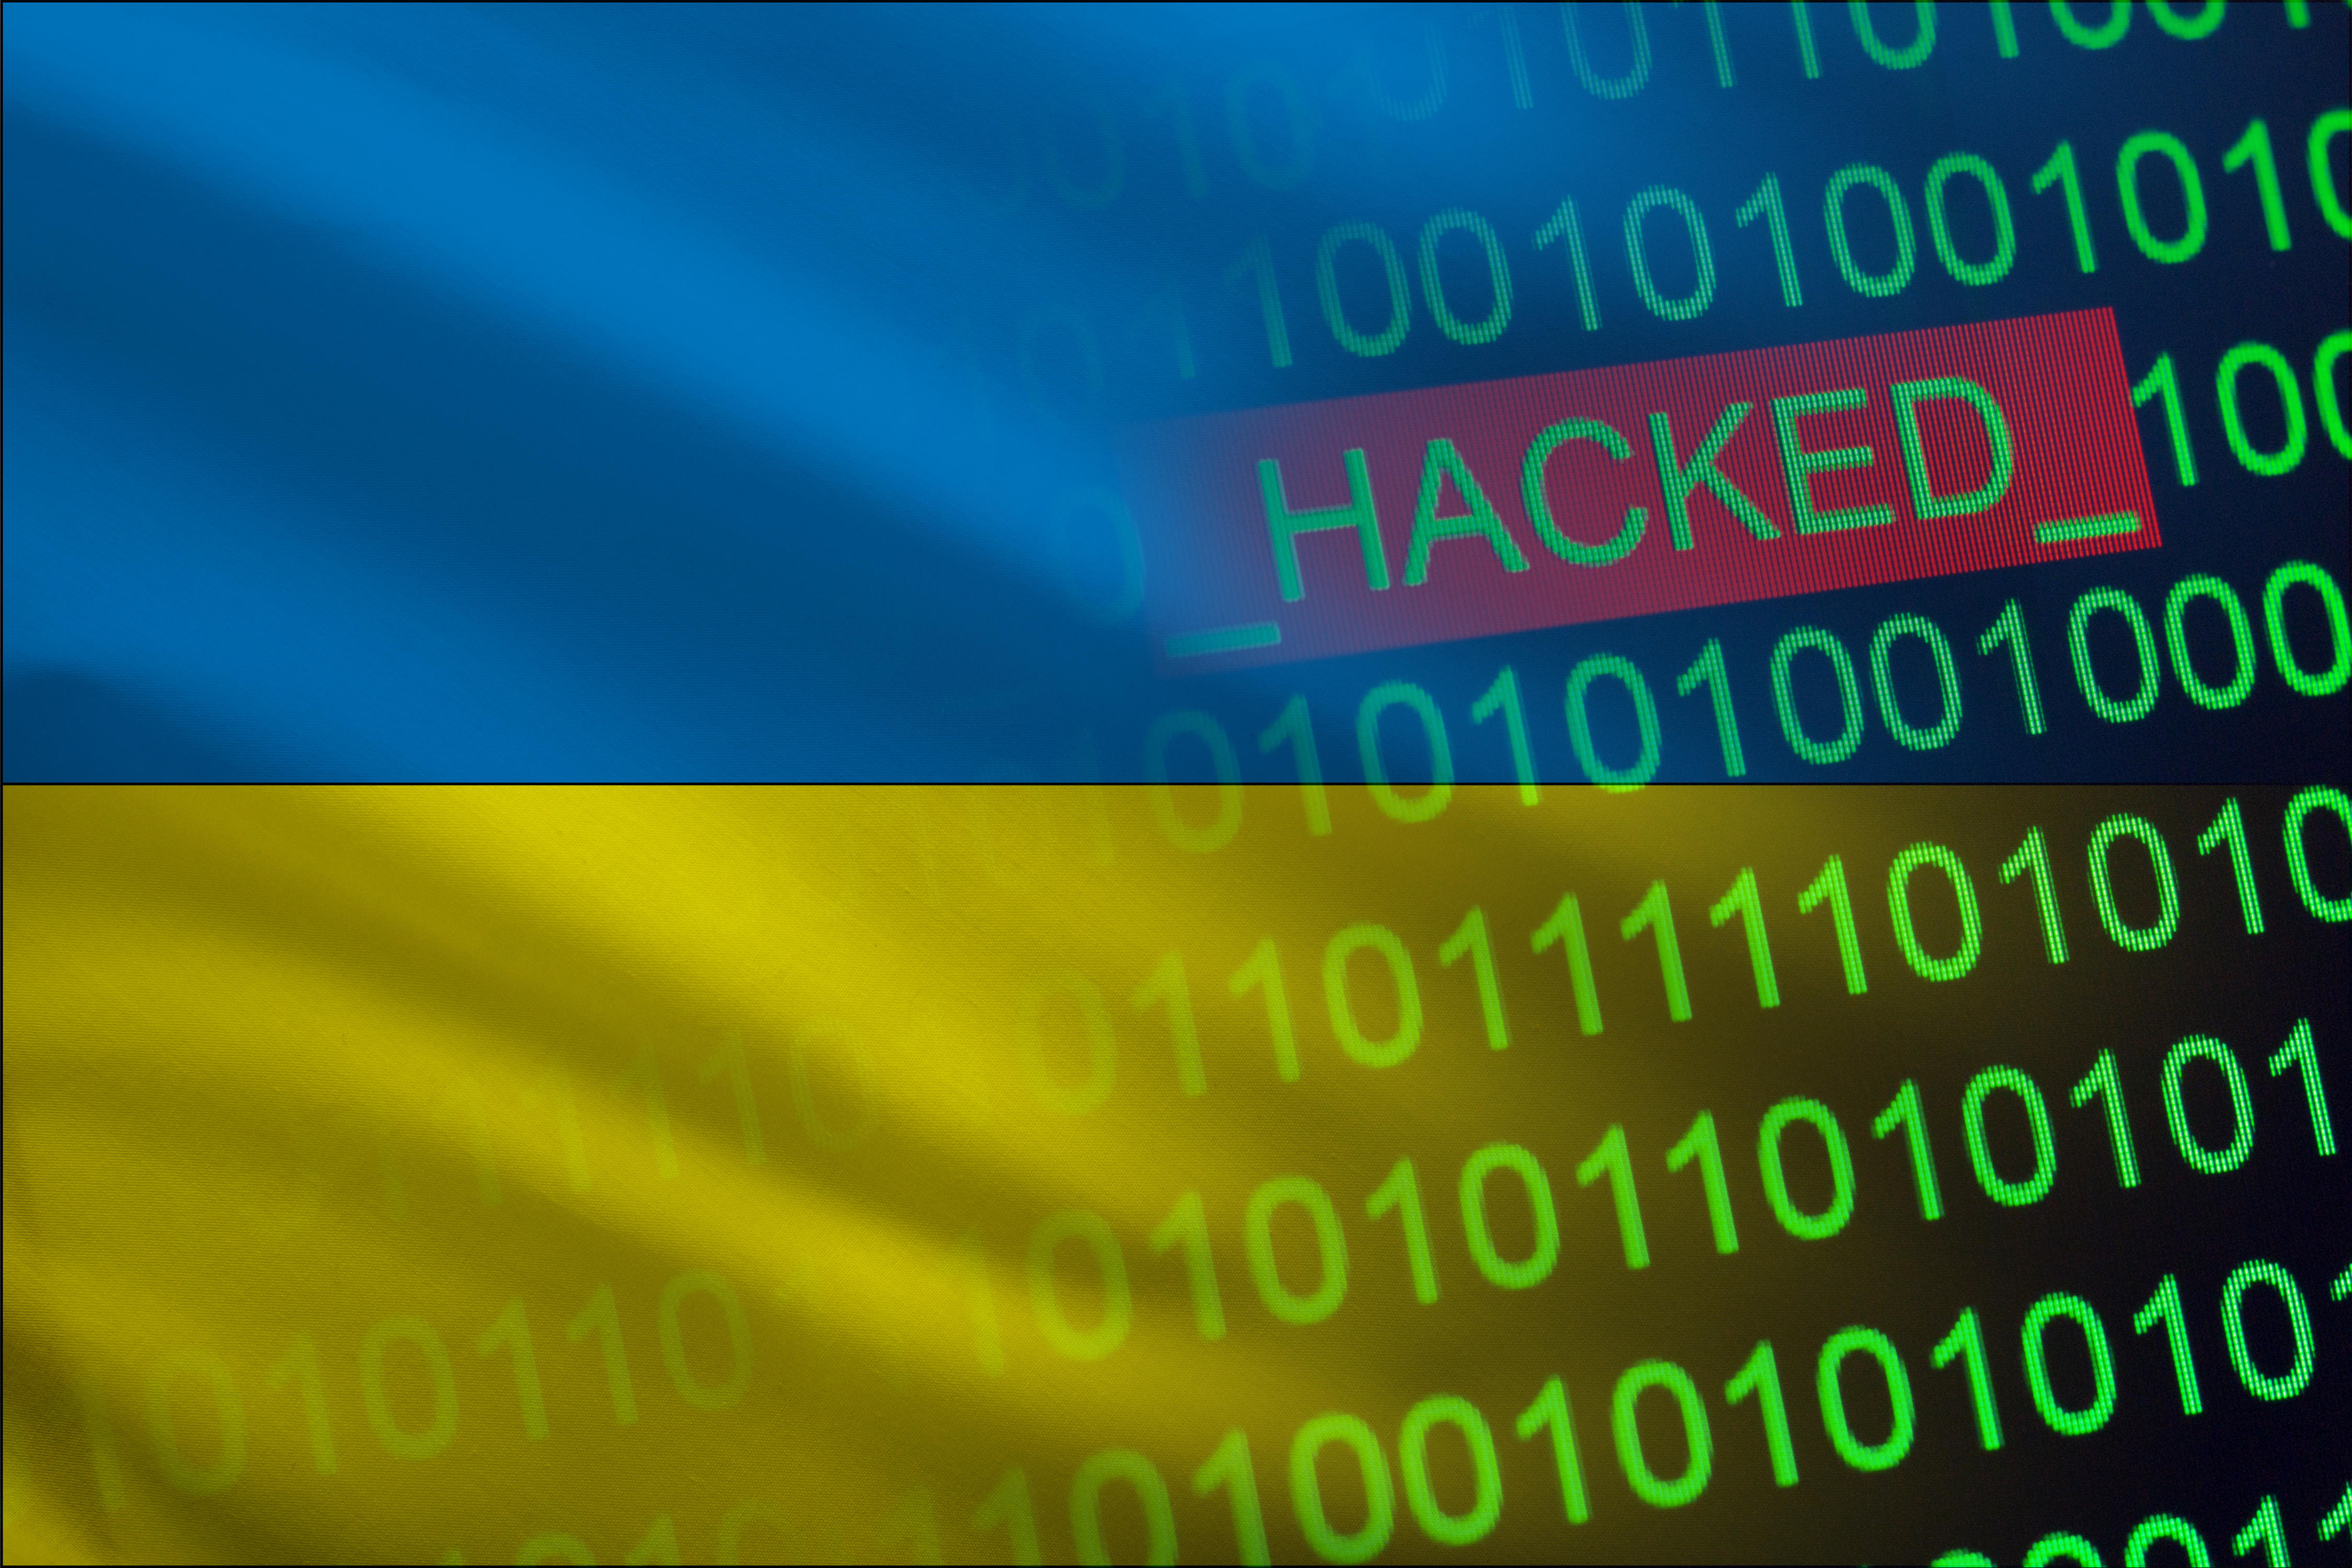 From Dark Reading – Russian Water Utility Hacked in Retaliation for Kyivstar Hit